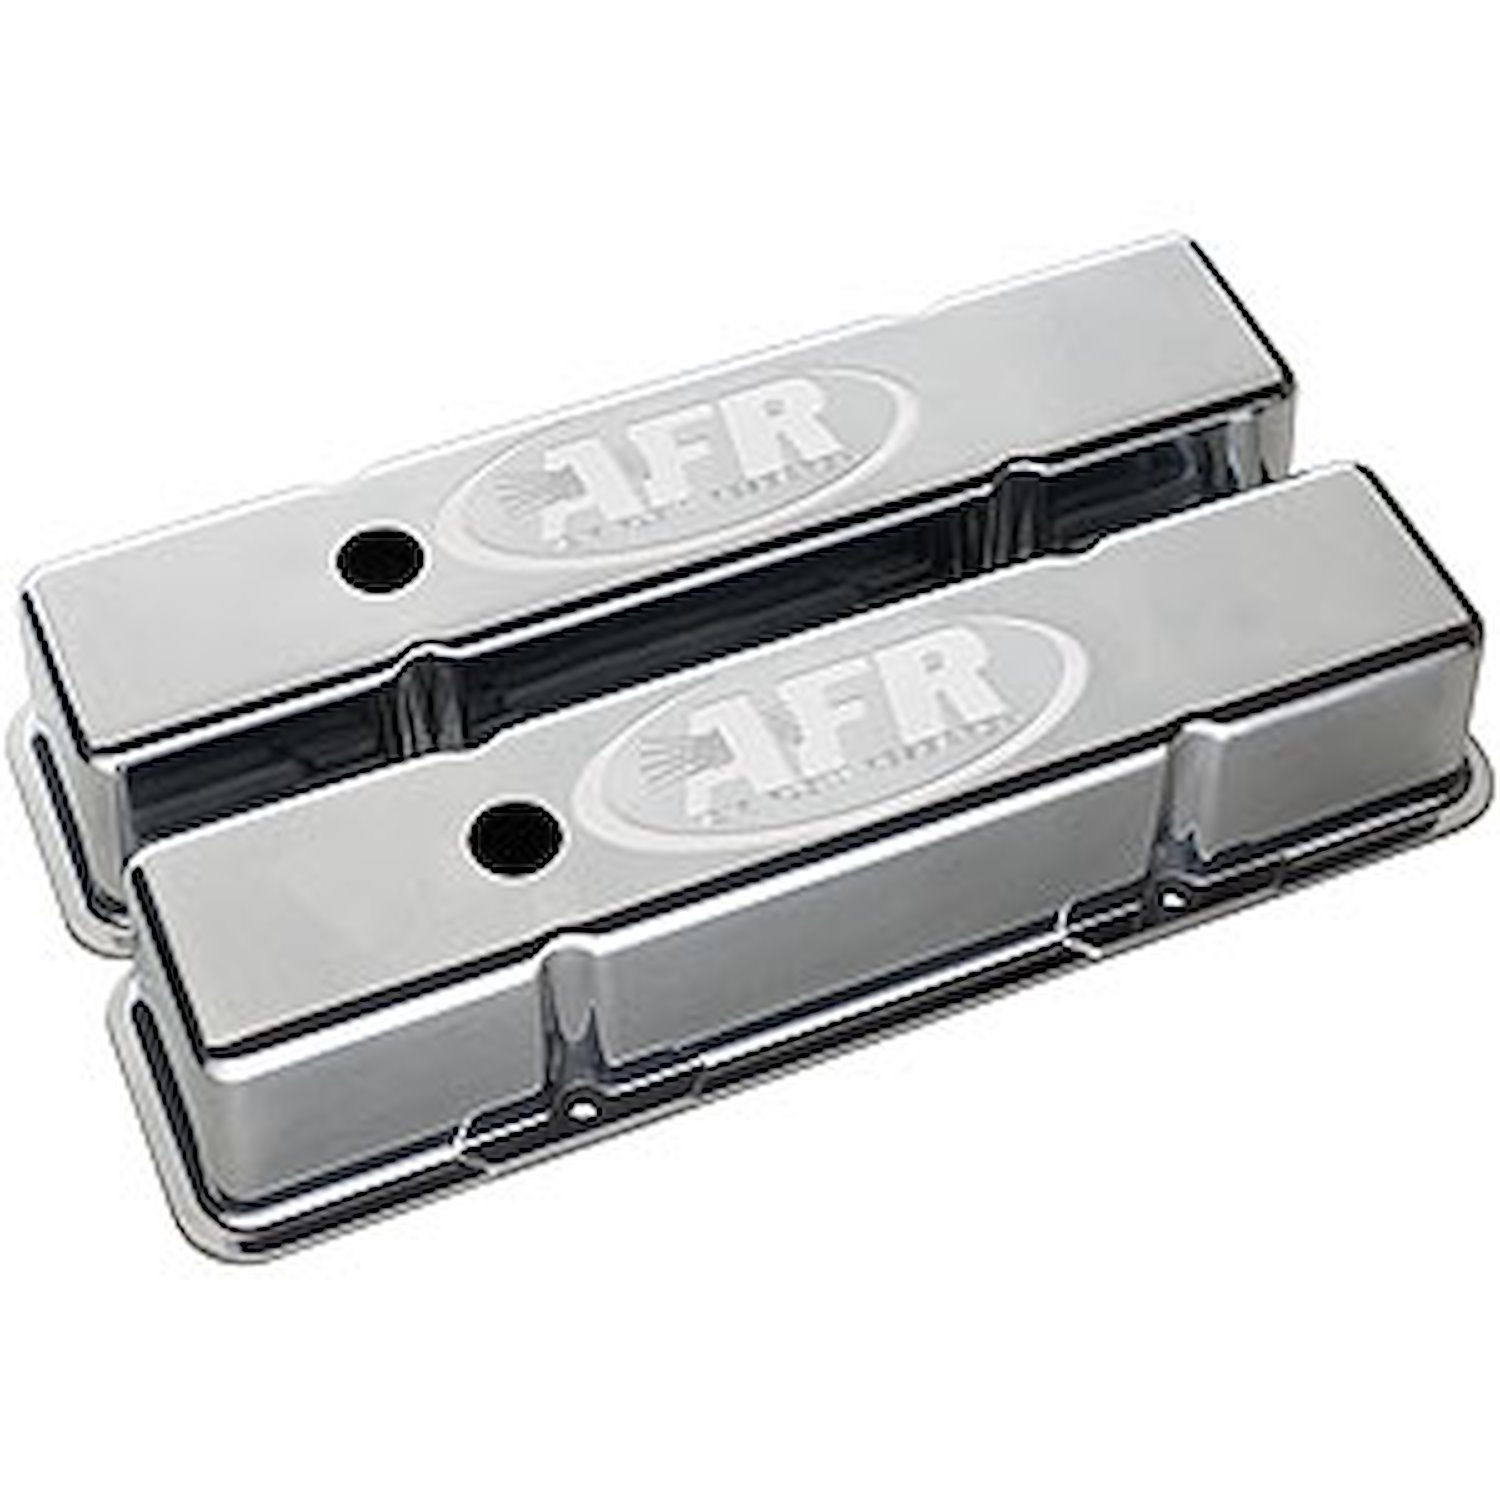 Cast Aluminum Tall Valve Covers for Small Block Chevy [Polished]